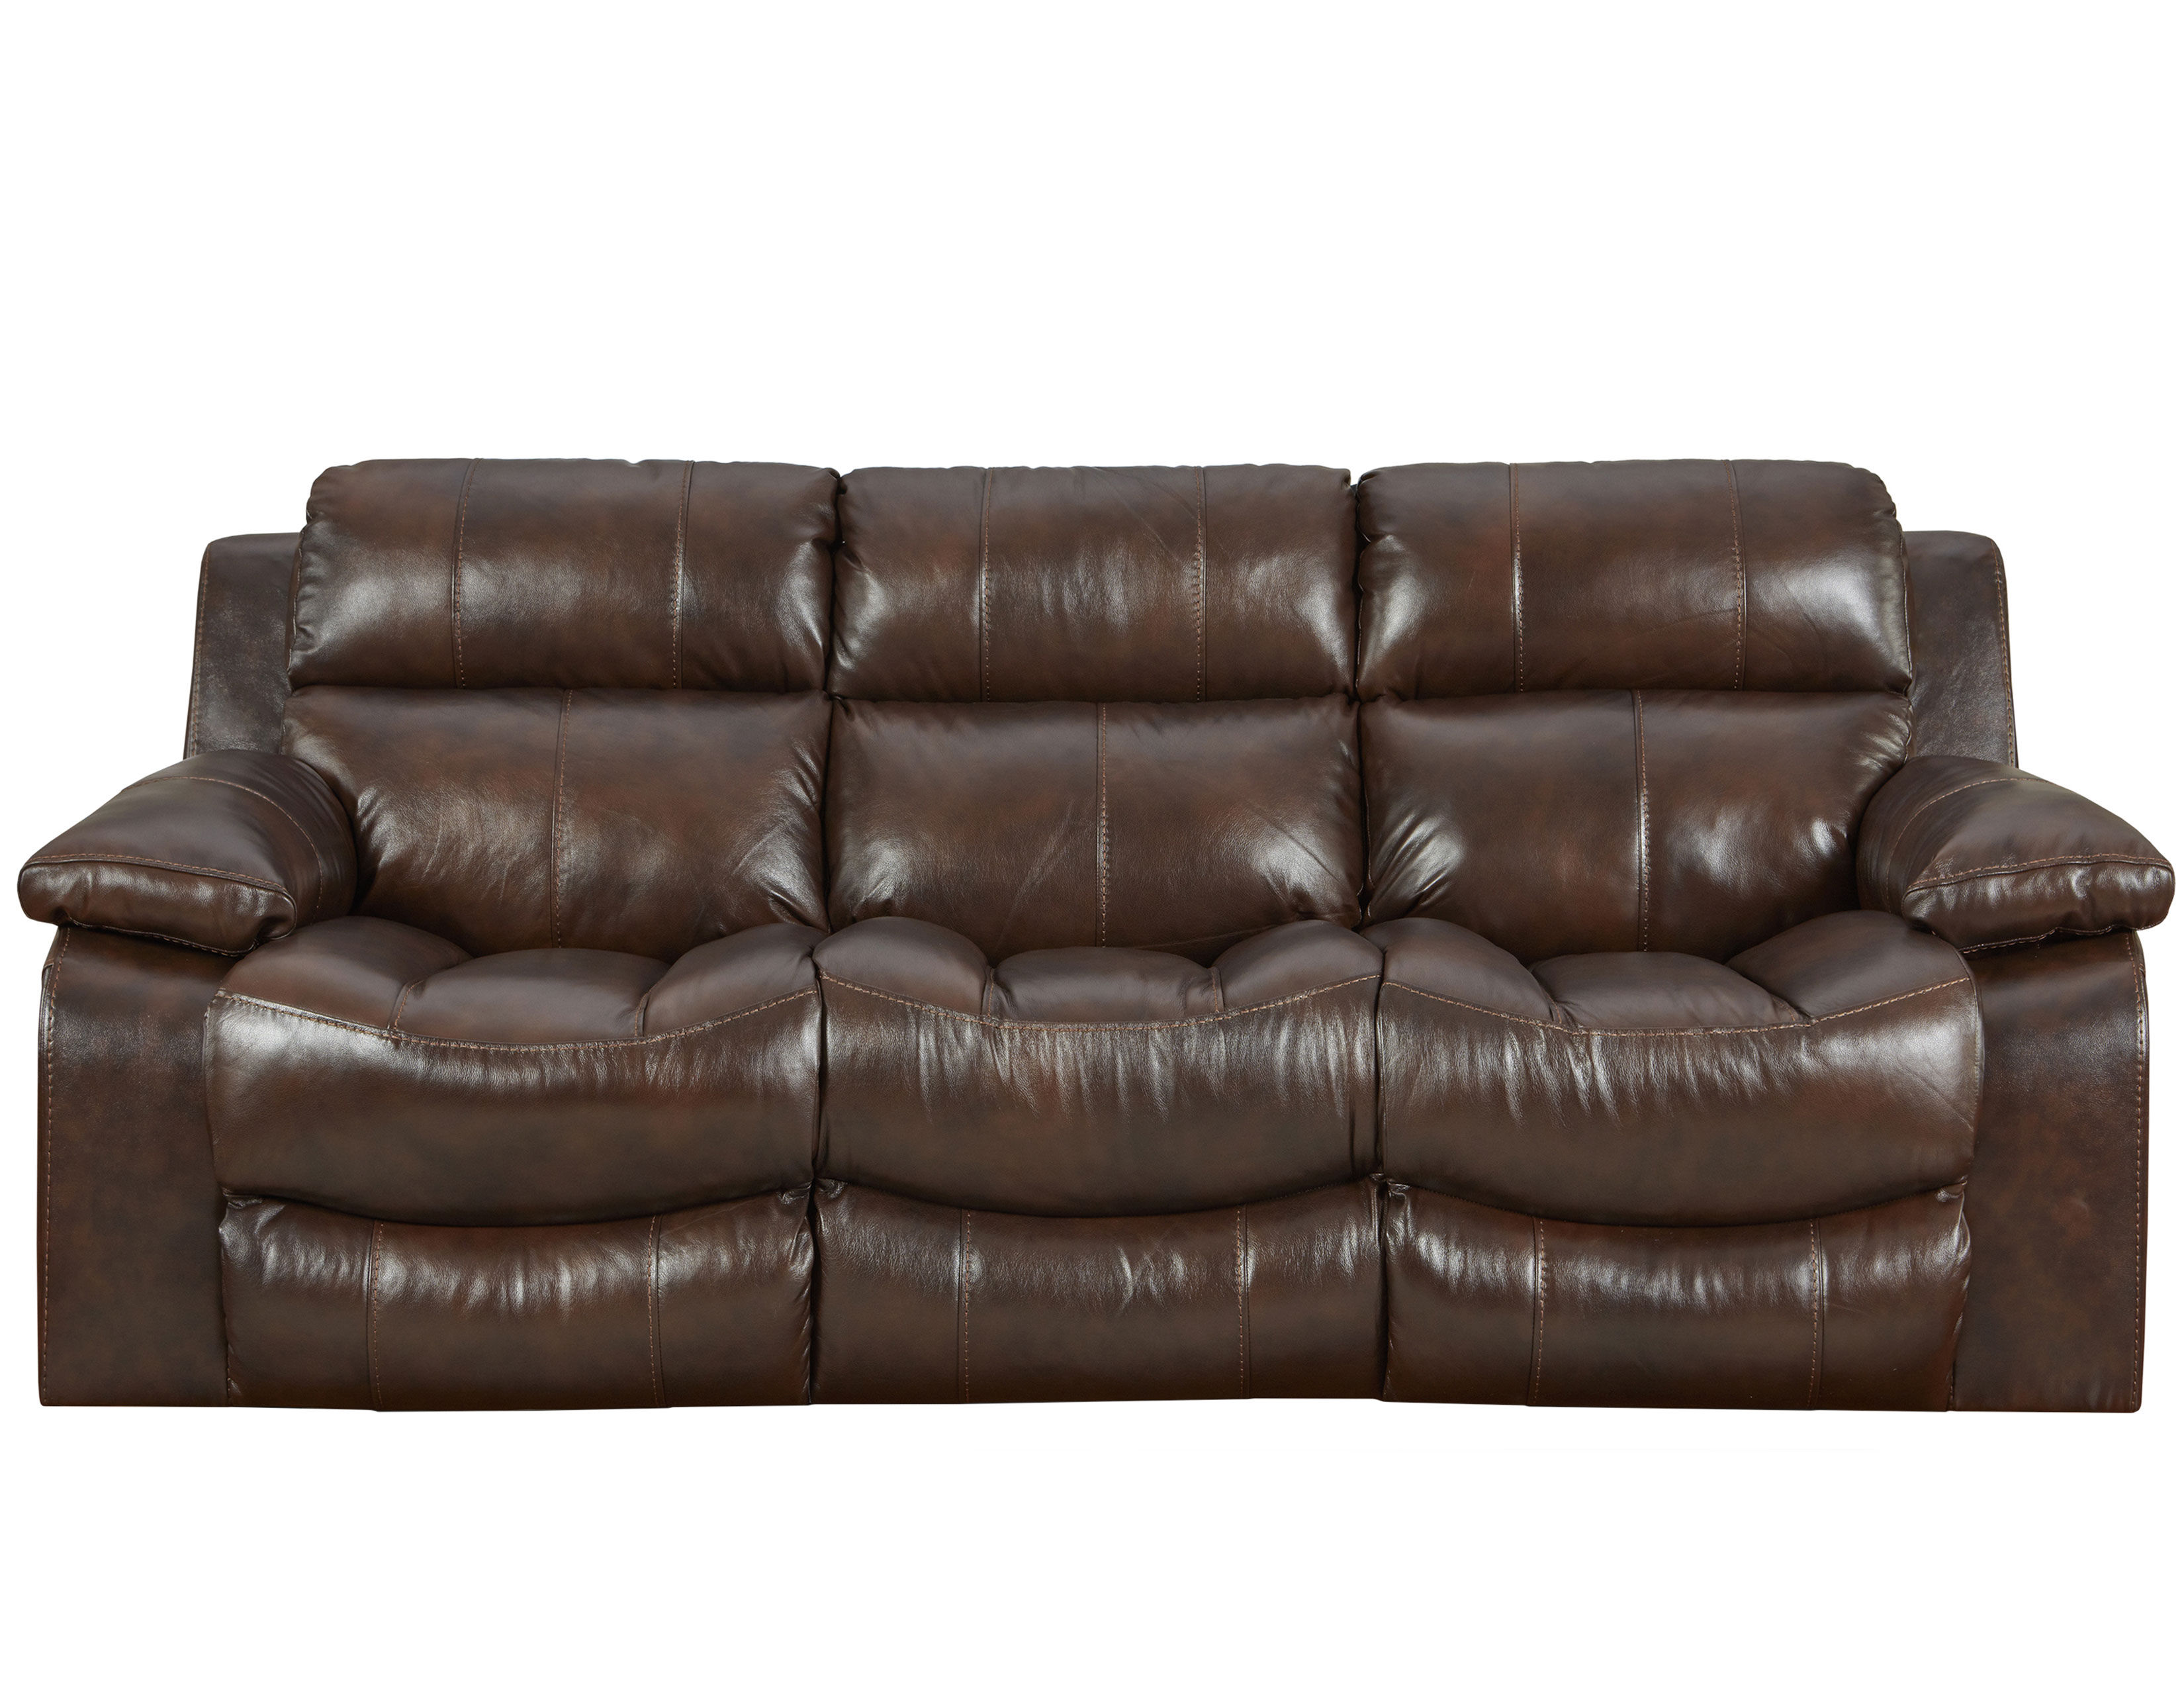 Positano Leather Reclining Sofa 90, Rooms To Go Leather Recliner